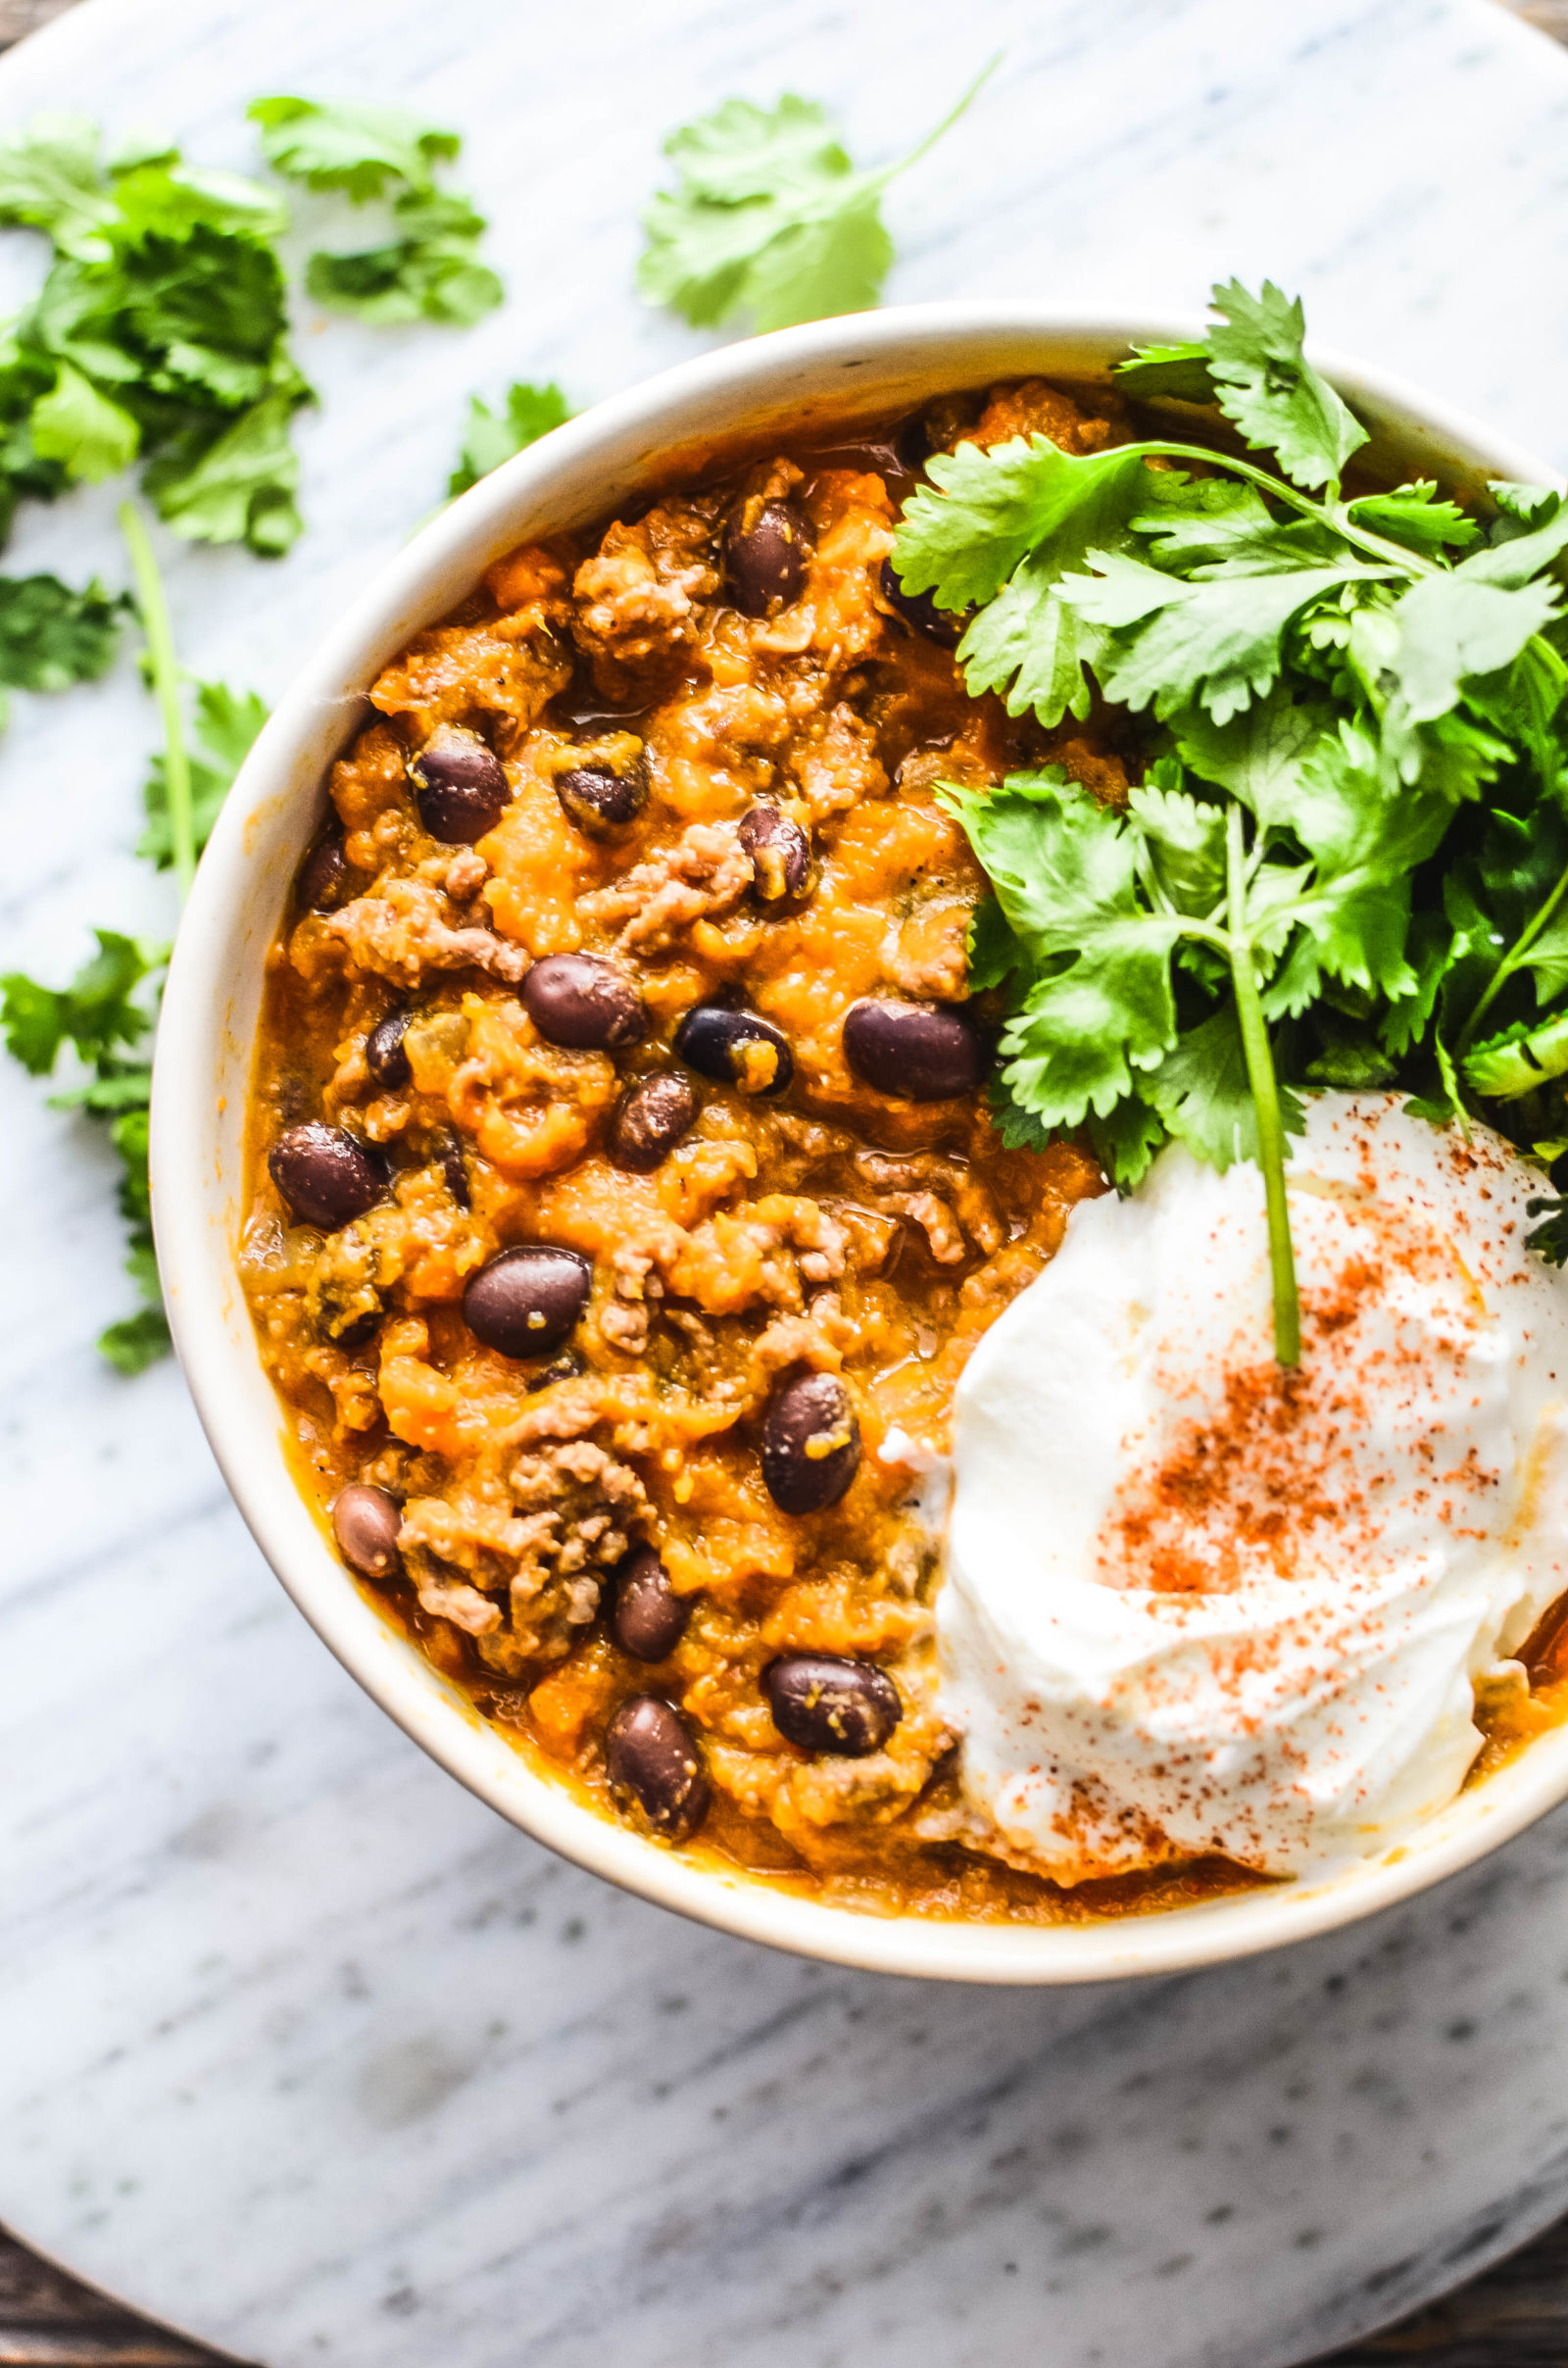 My spicy, hearty sweet potato turkey chili will keep you warm all fall and winter. Whip up this warming chili dish for dinner tonight.